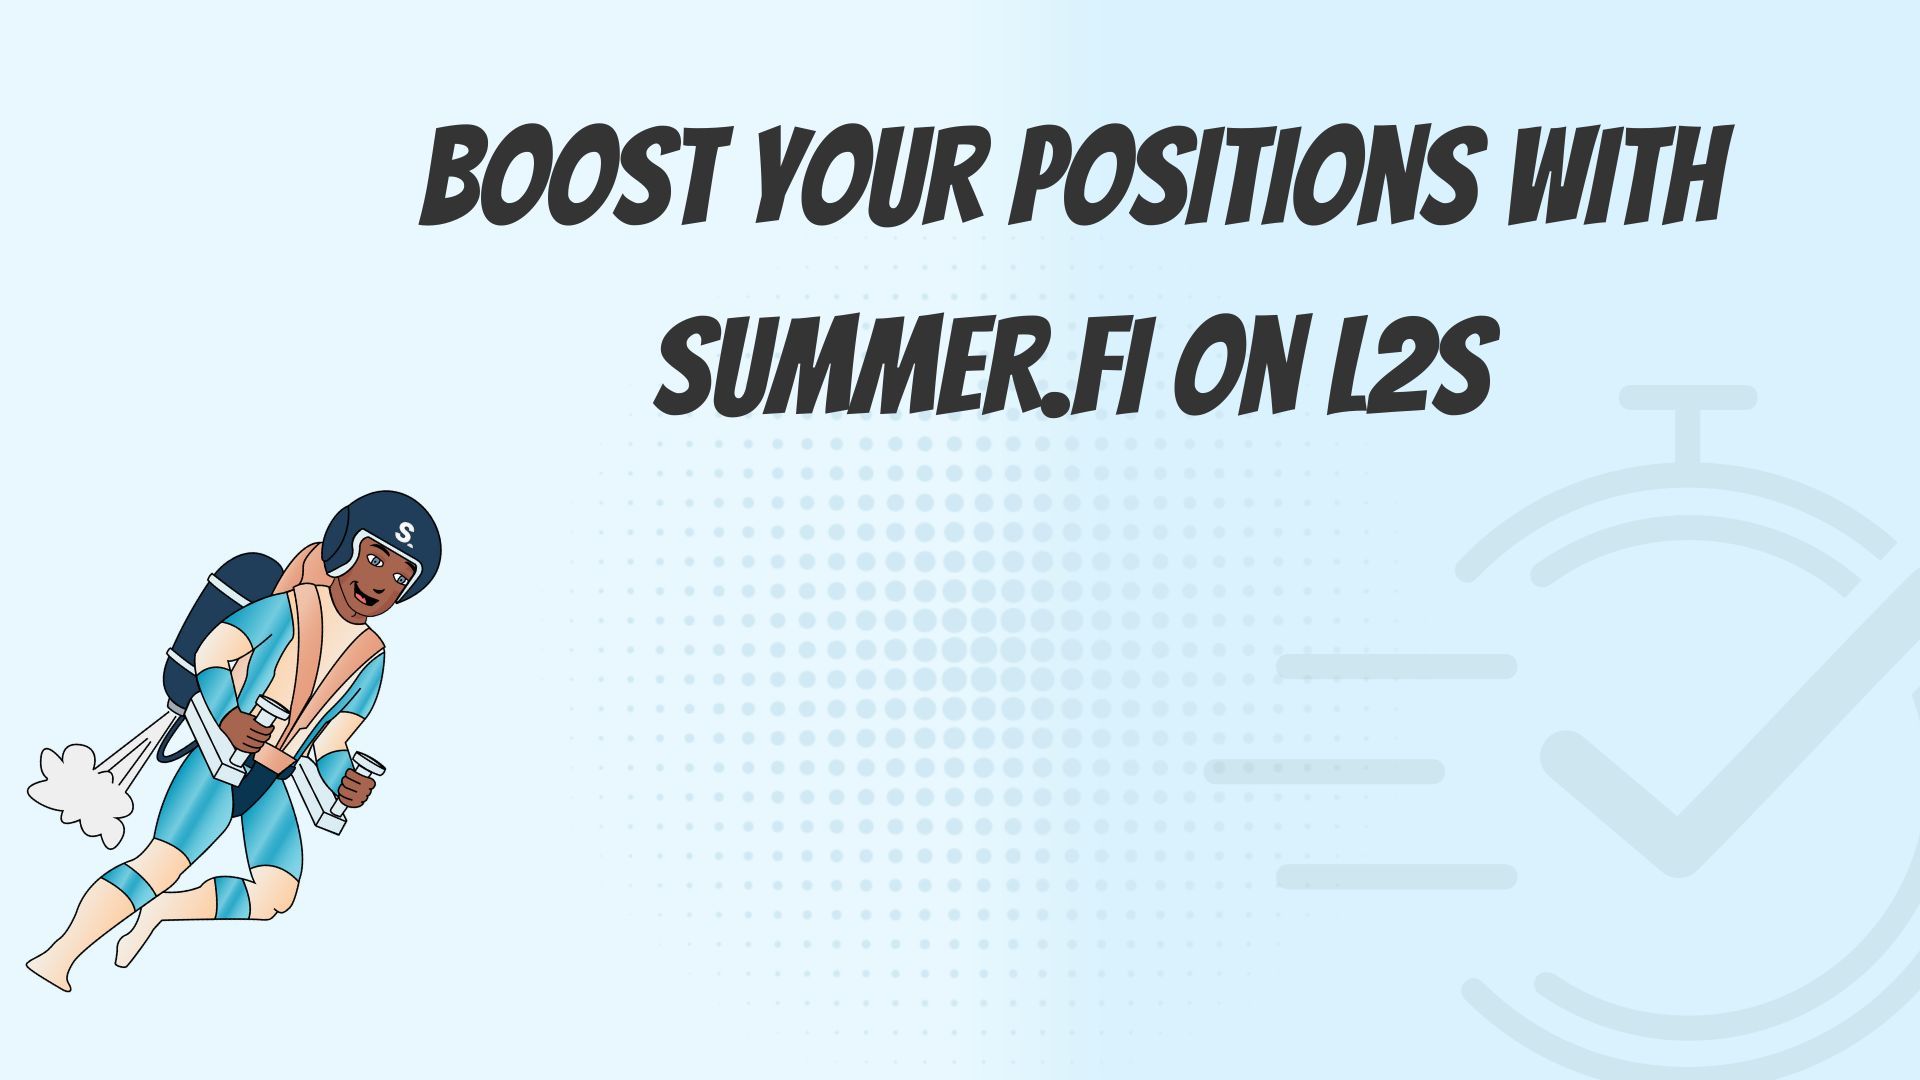 Boost your positions with Summer.fi on L2s